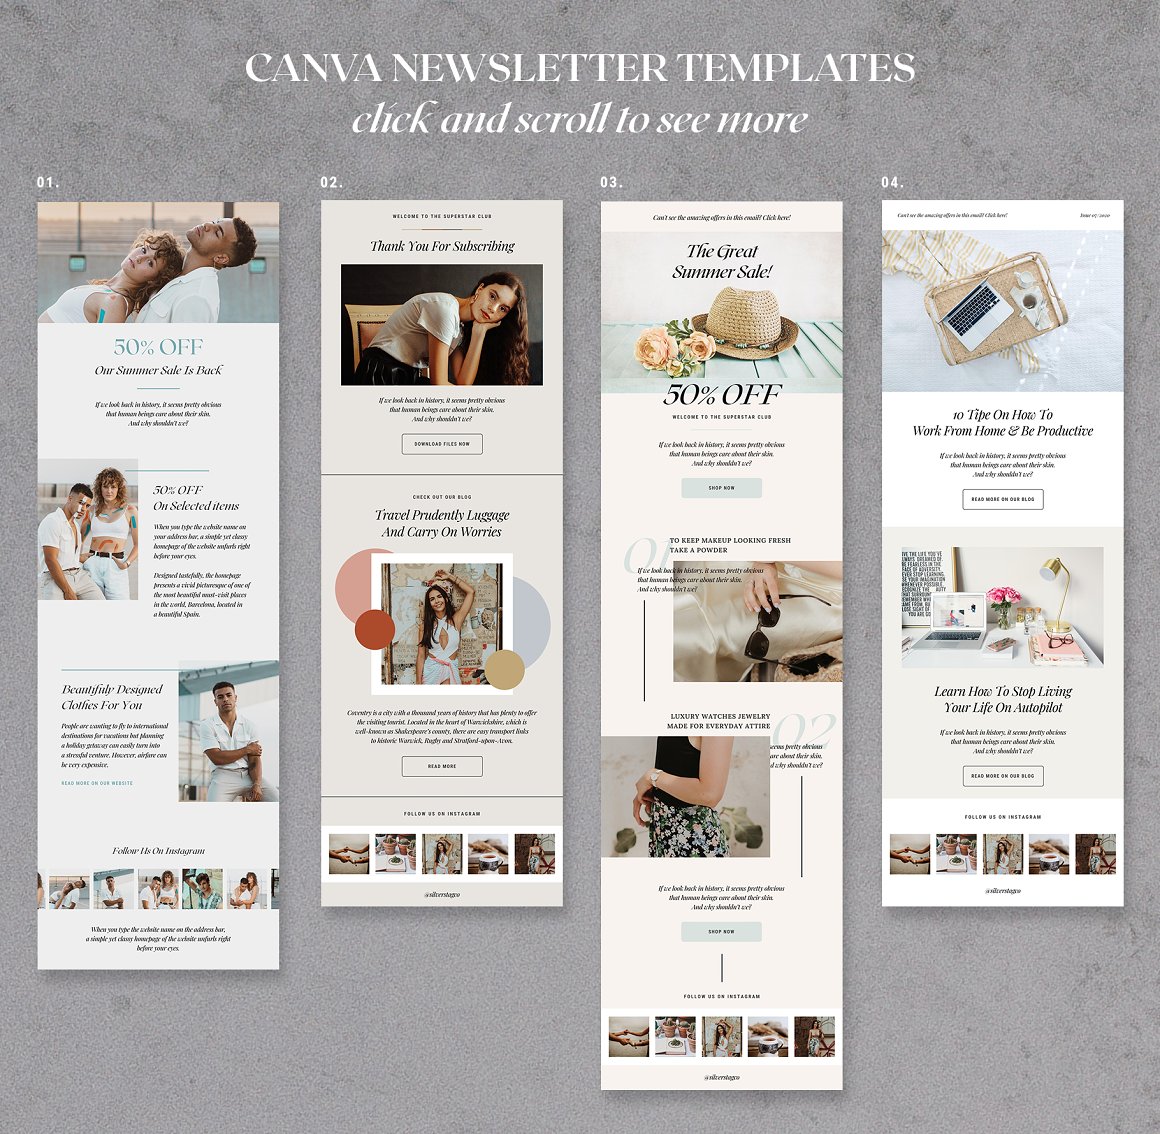 An Image Pack of an Irresistible Newsletter Template.